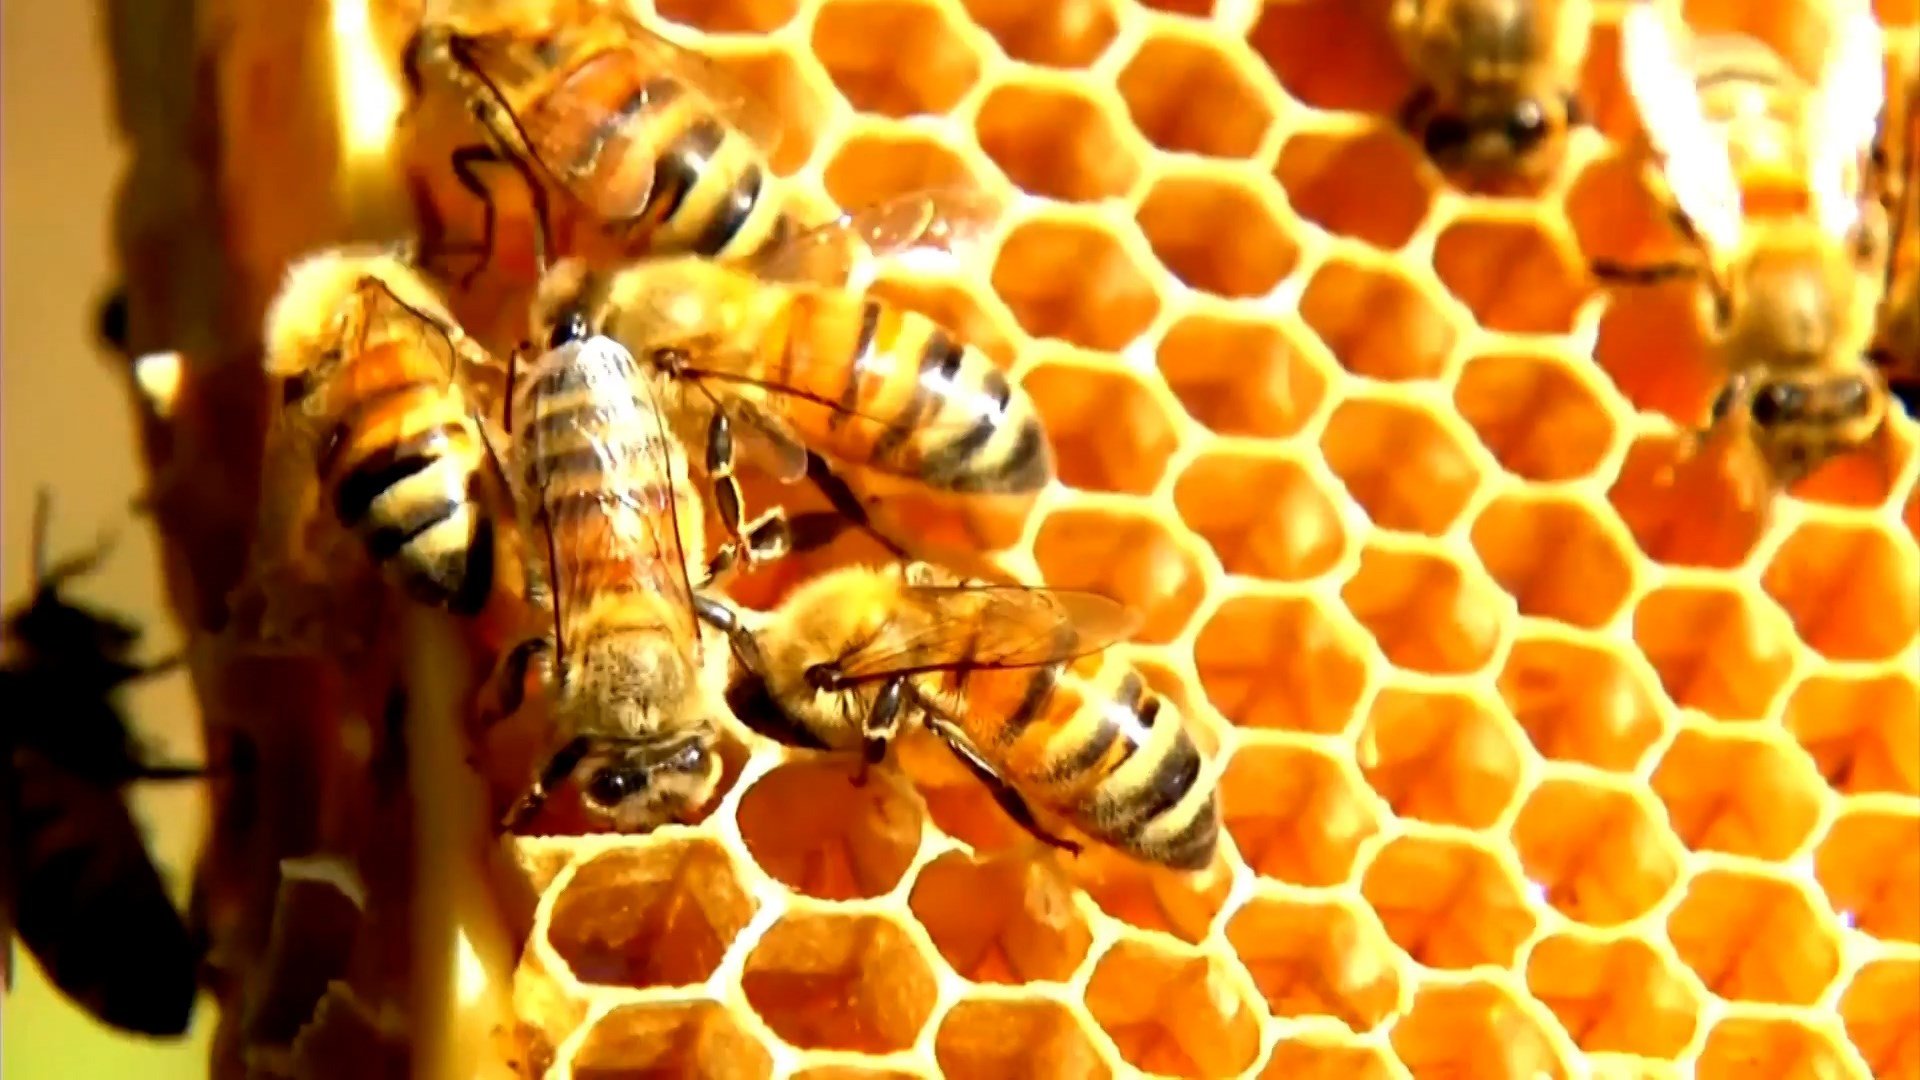 New York lawmakers urge Gov. Hochul to sign legislation to protect honeybees